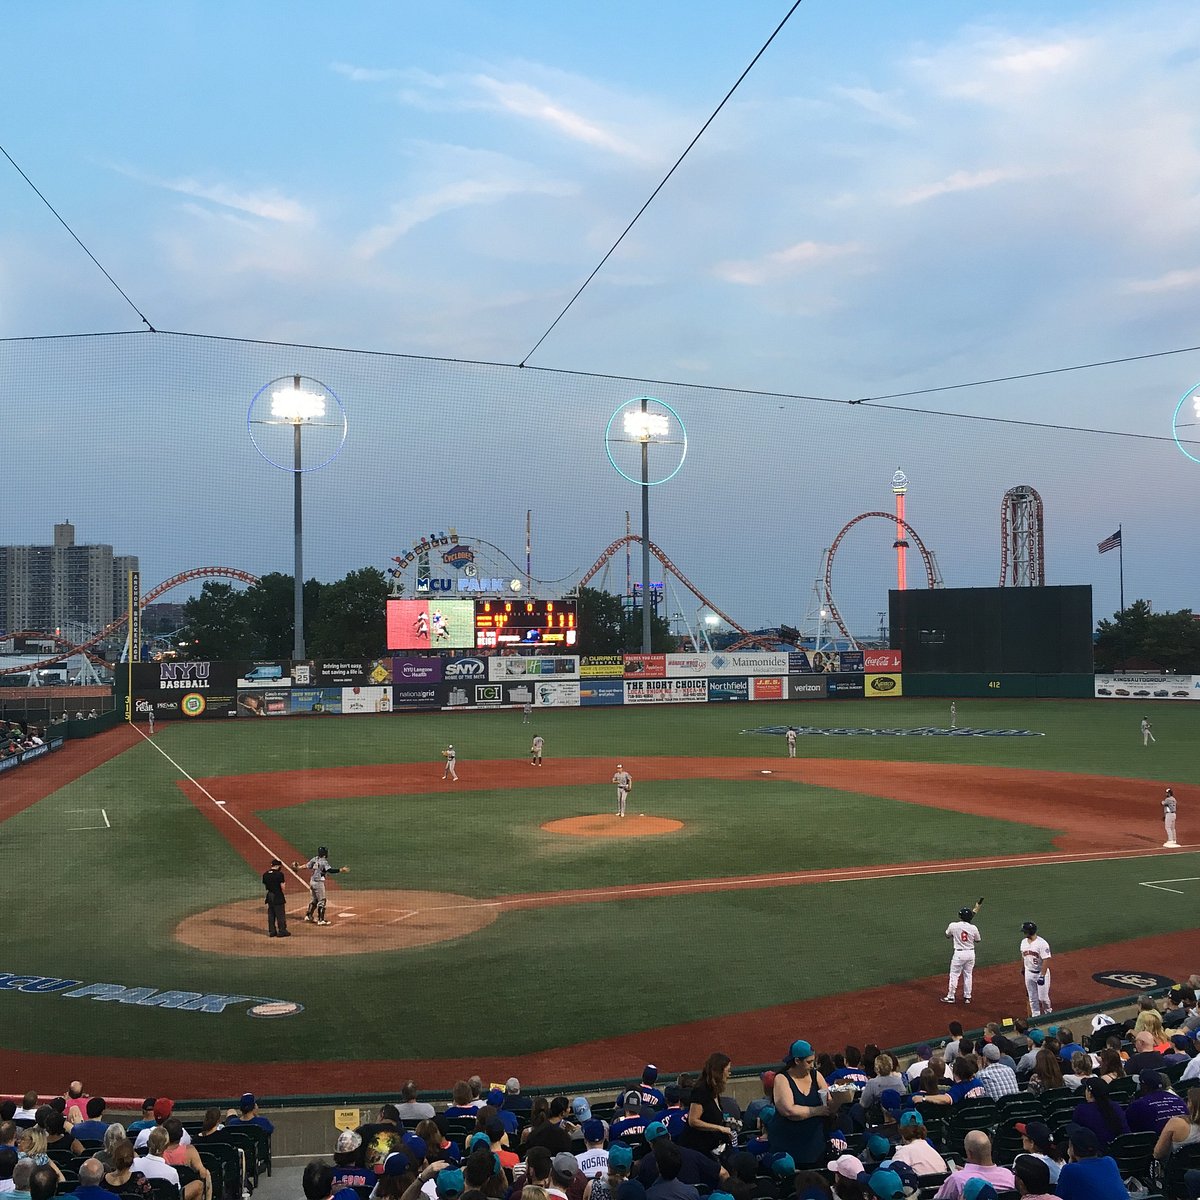 Brooklyn Cyclones Baseball - MCU Park - All You Need to Know